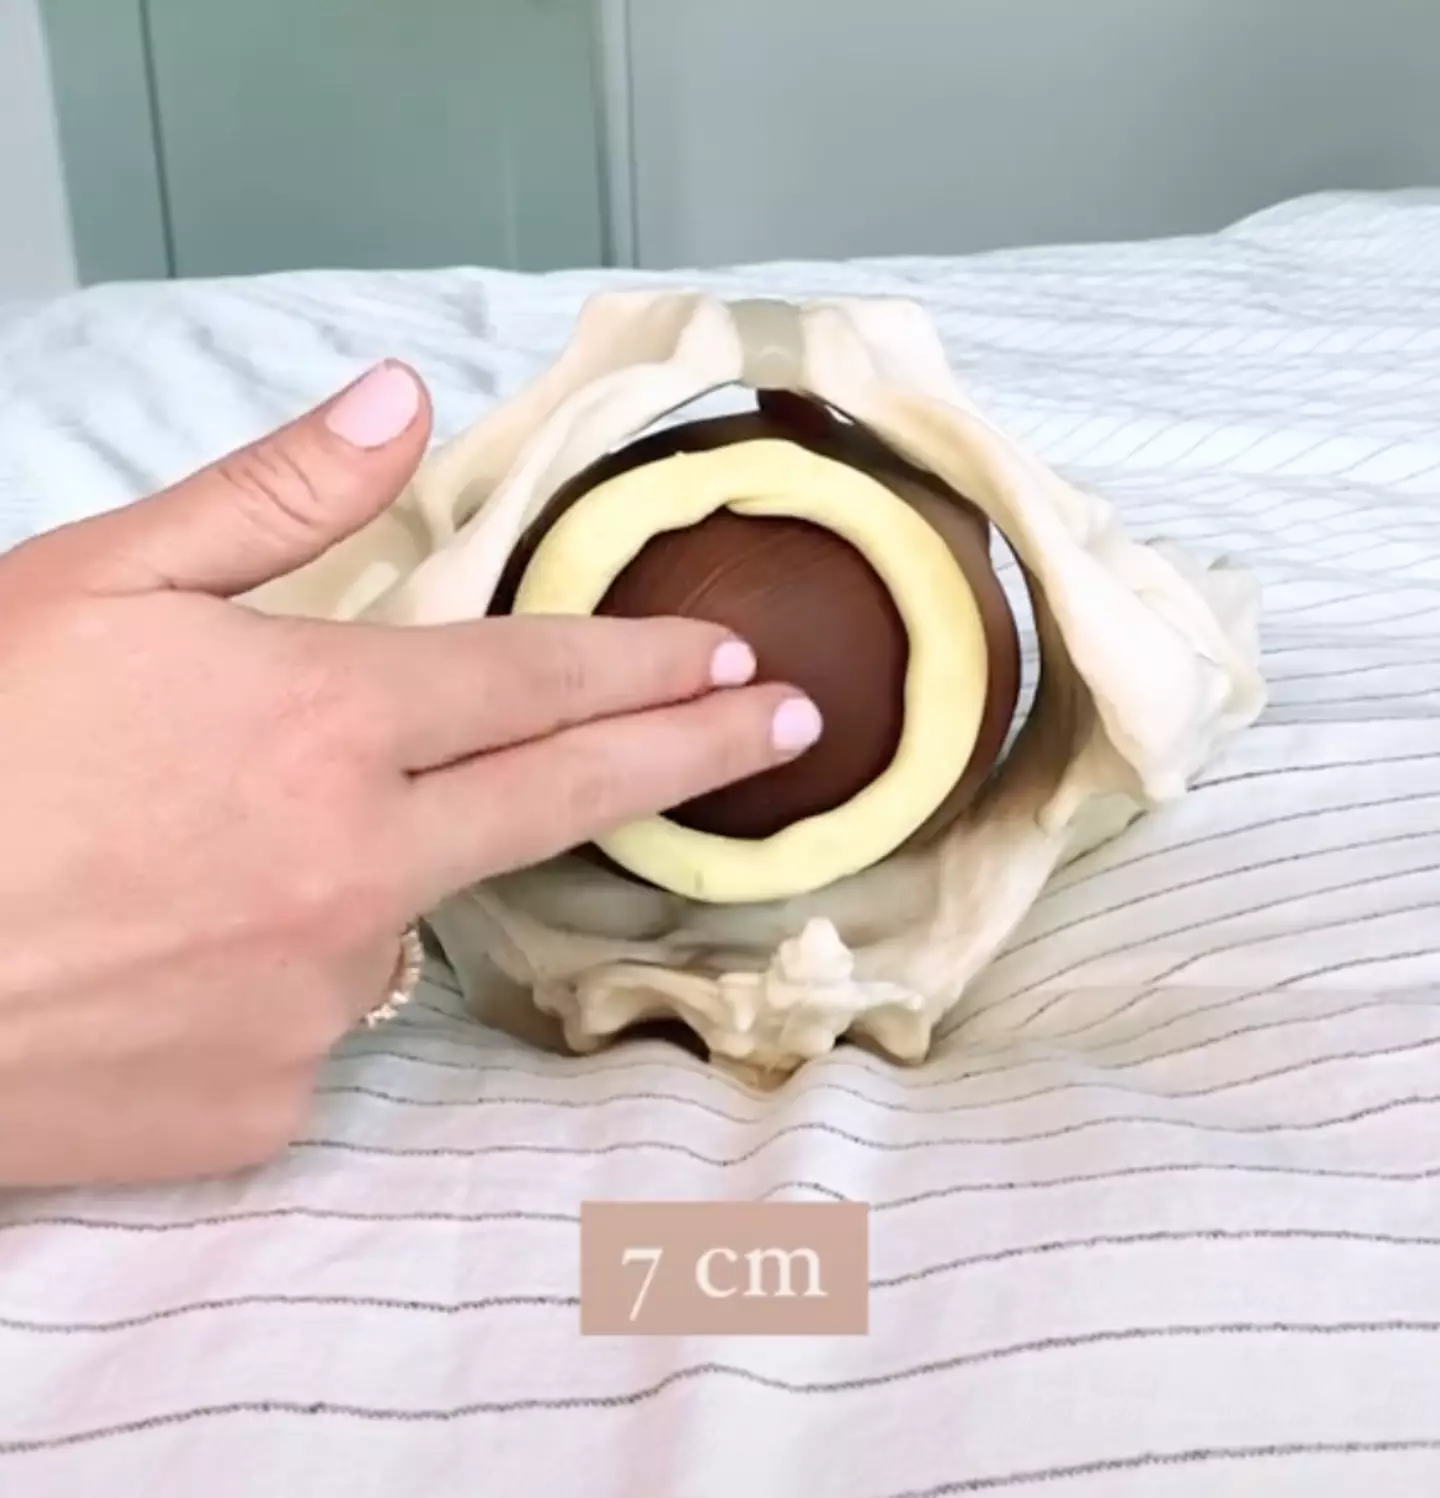 The TikTok video shows the different stages a woman's cervix will expand from 1cm to 10cm. (